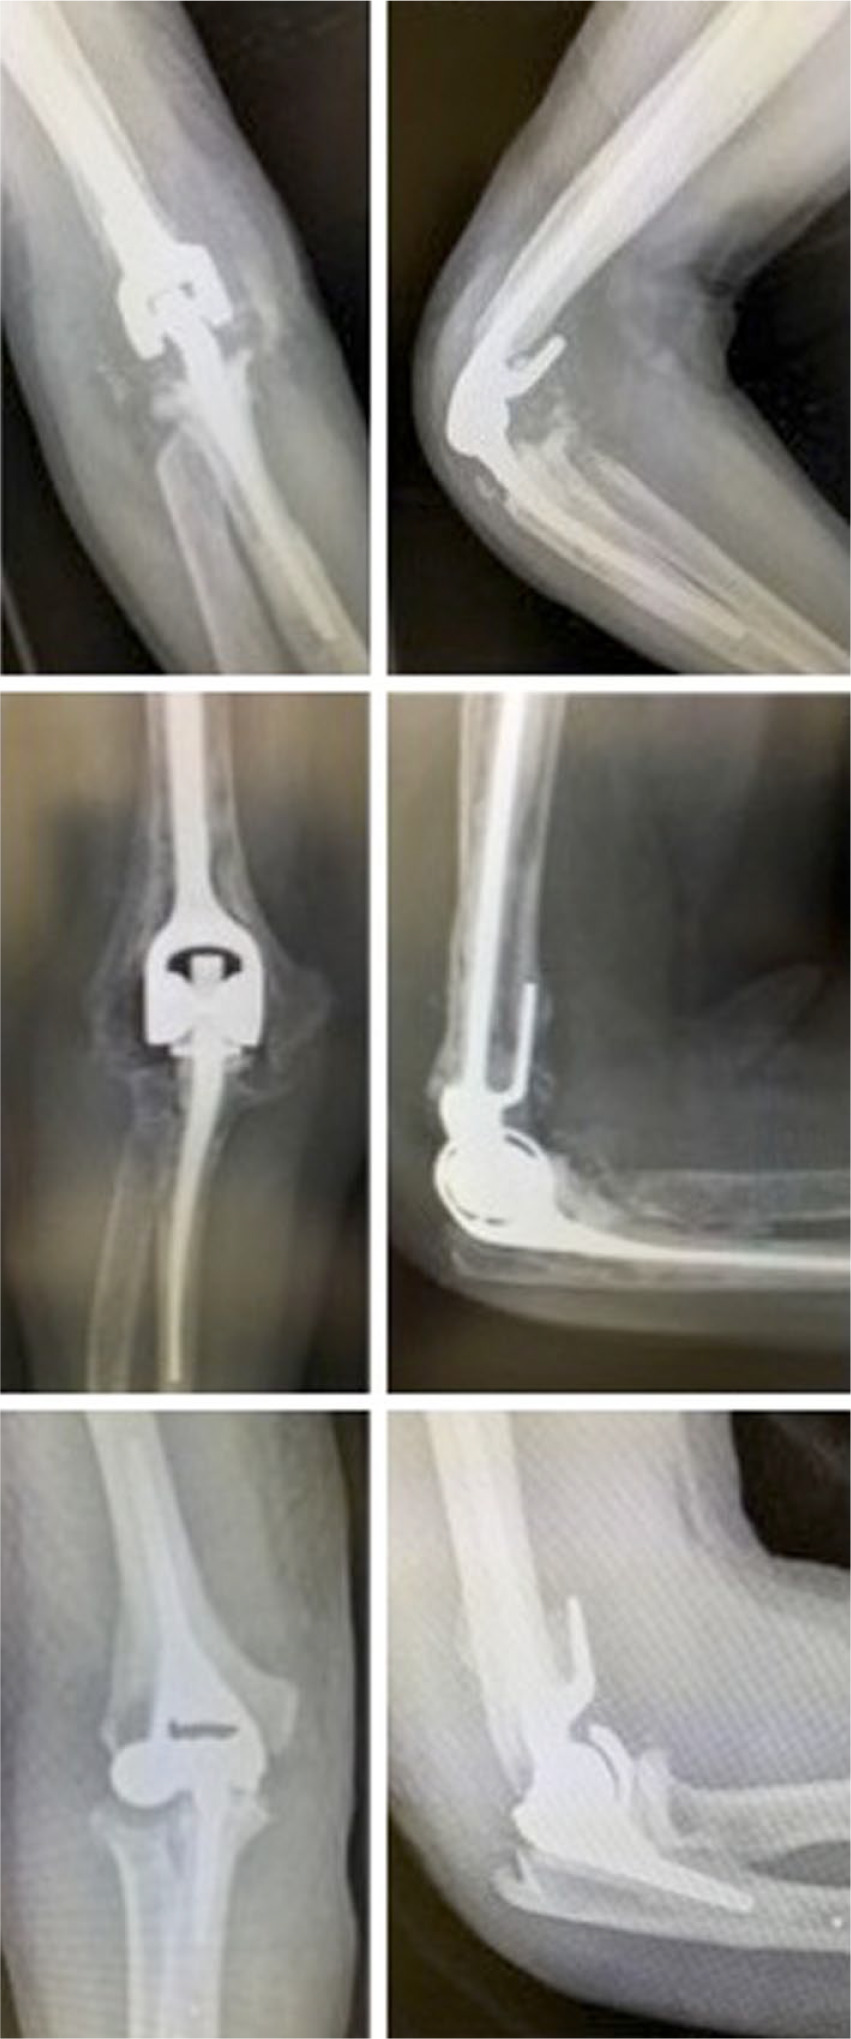 Fig. 3 
            Radiographs presenting commonly used linked prostheses. From top to bottom: Coonrad-Morrey; Discovery; and Latitude.
          